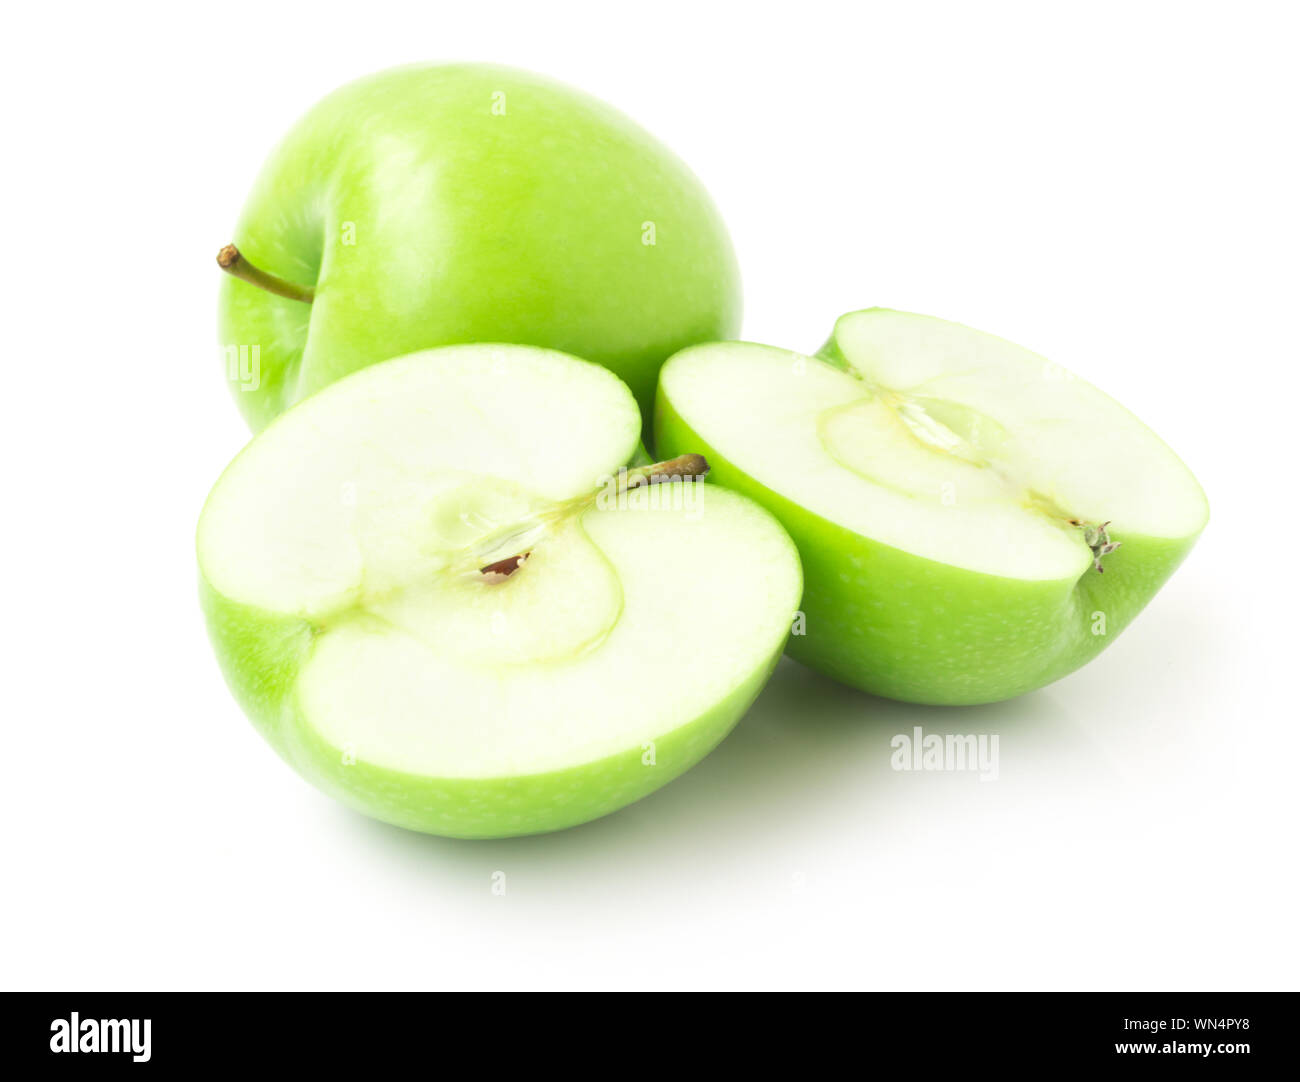 Close-up Of Granny Smith Apples Over White Background Stock Photo